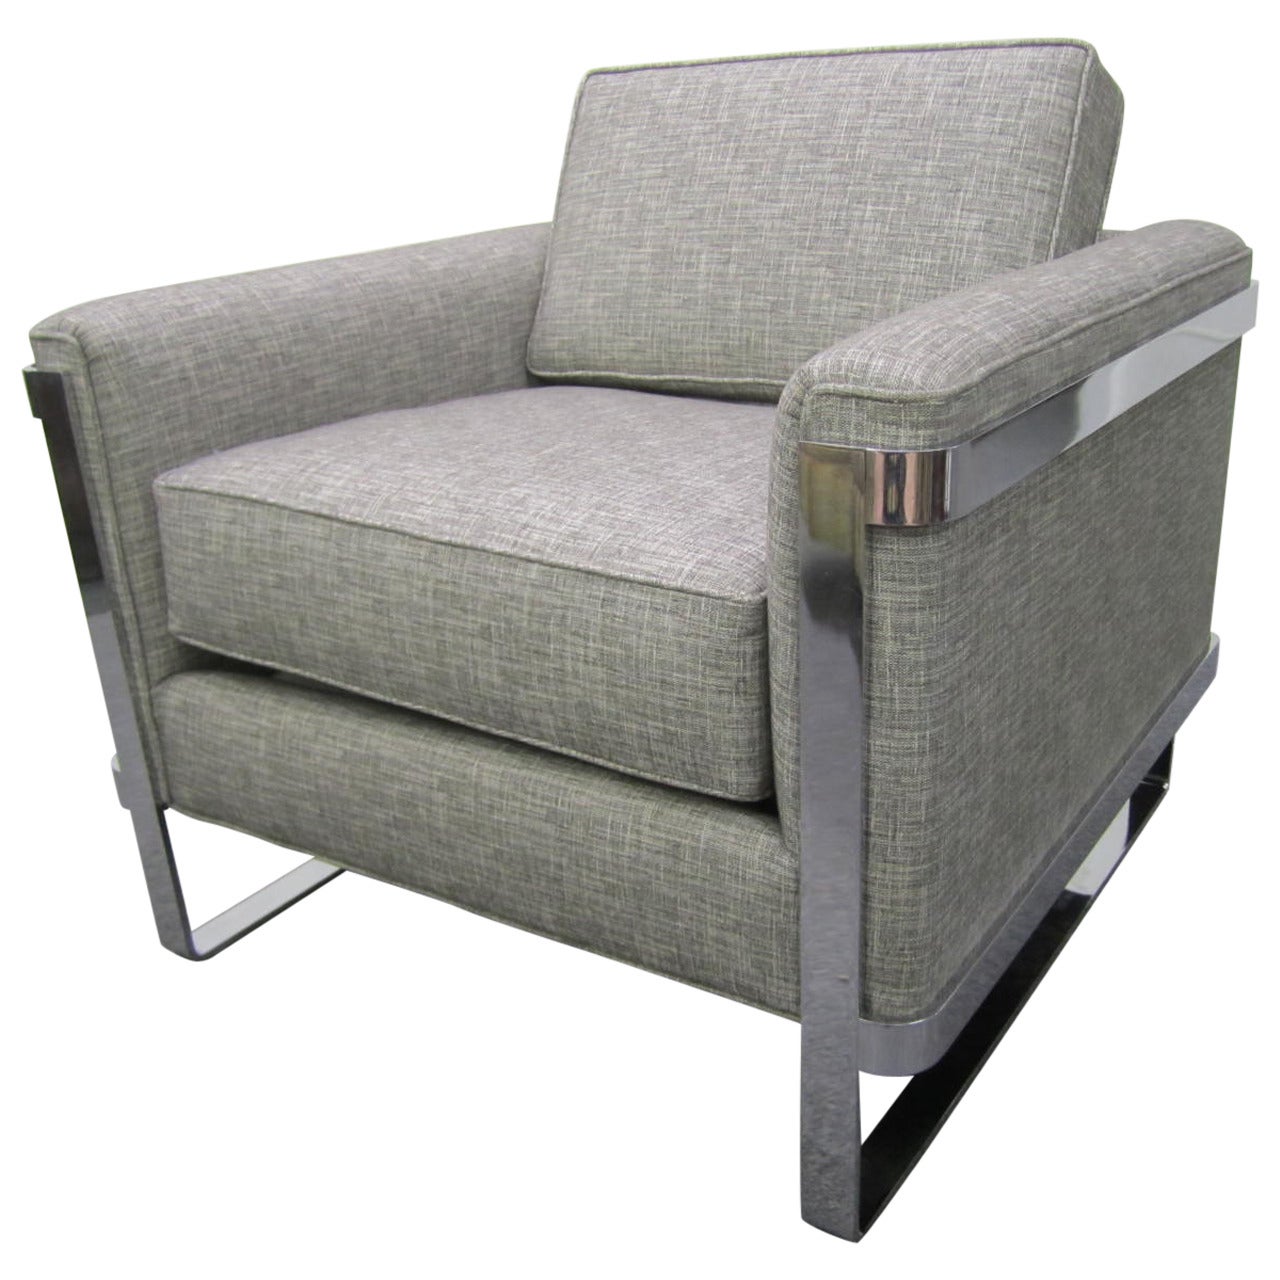 Excellent Chrome Flat Bar Lounge Chair, Mid-Century Modern For Sale